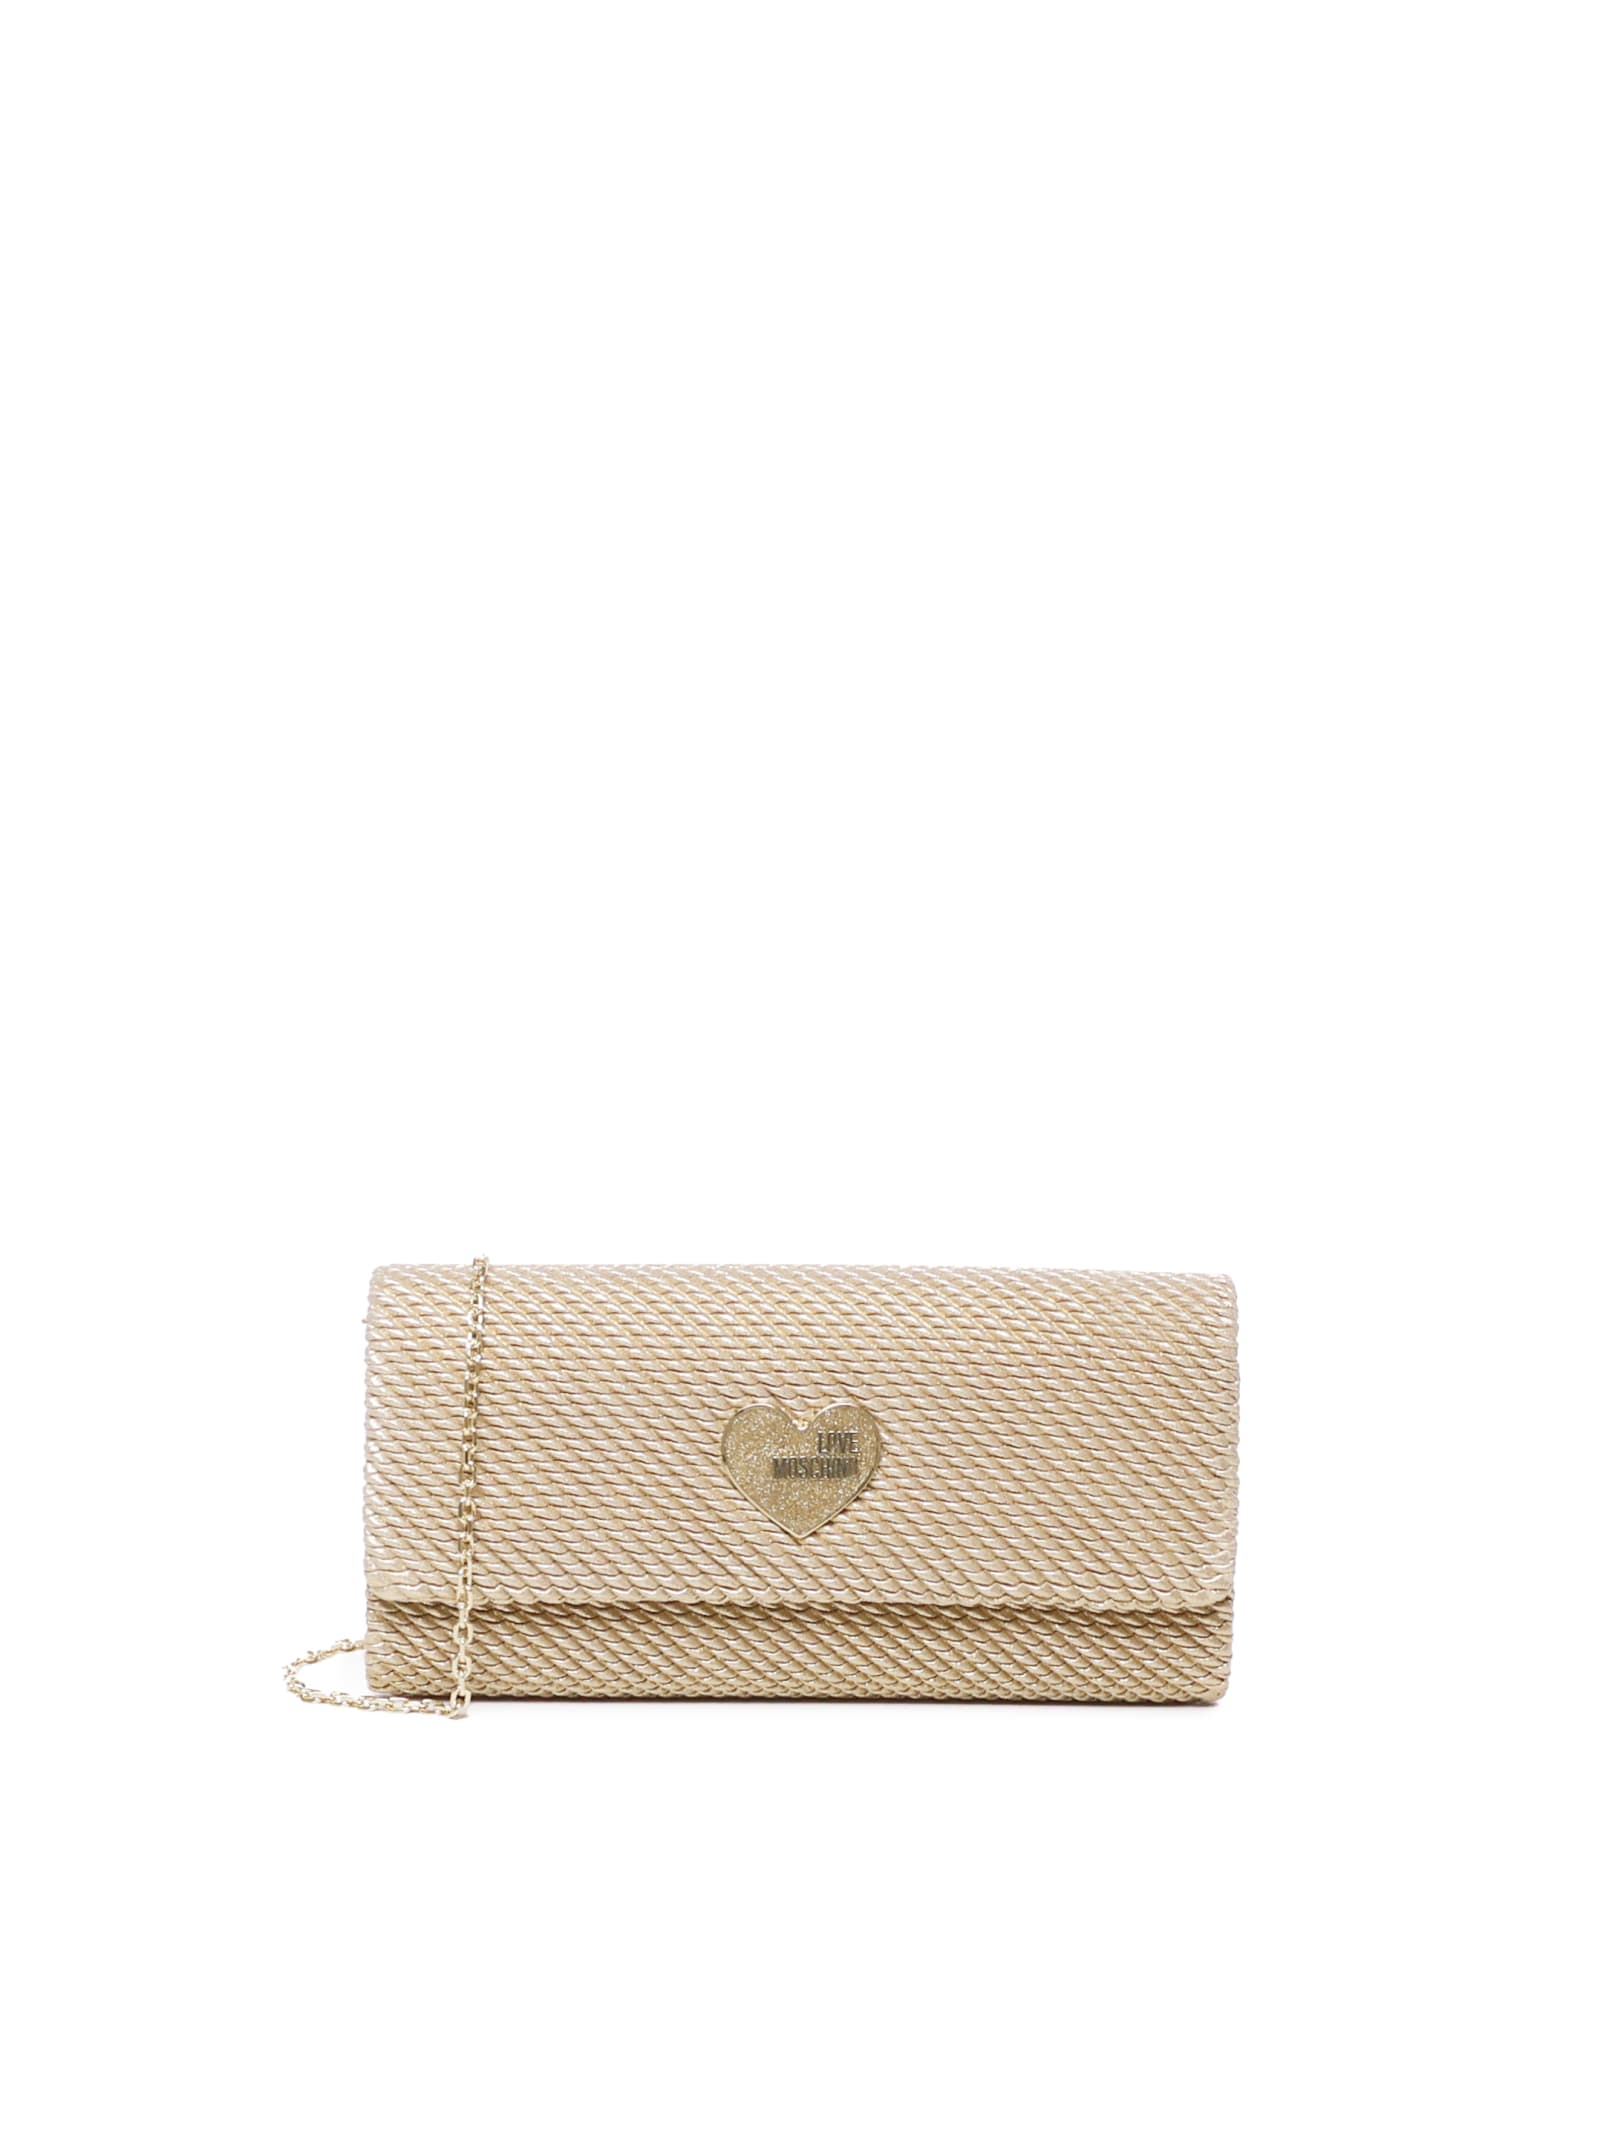 Clutch Bag With Thin Shoulder Strap